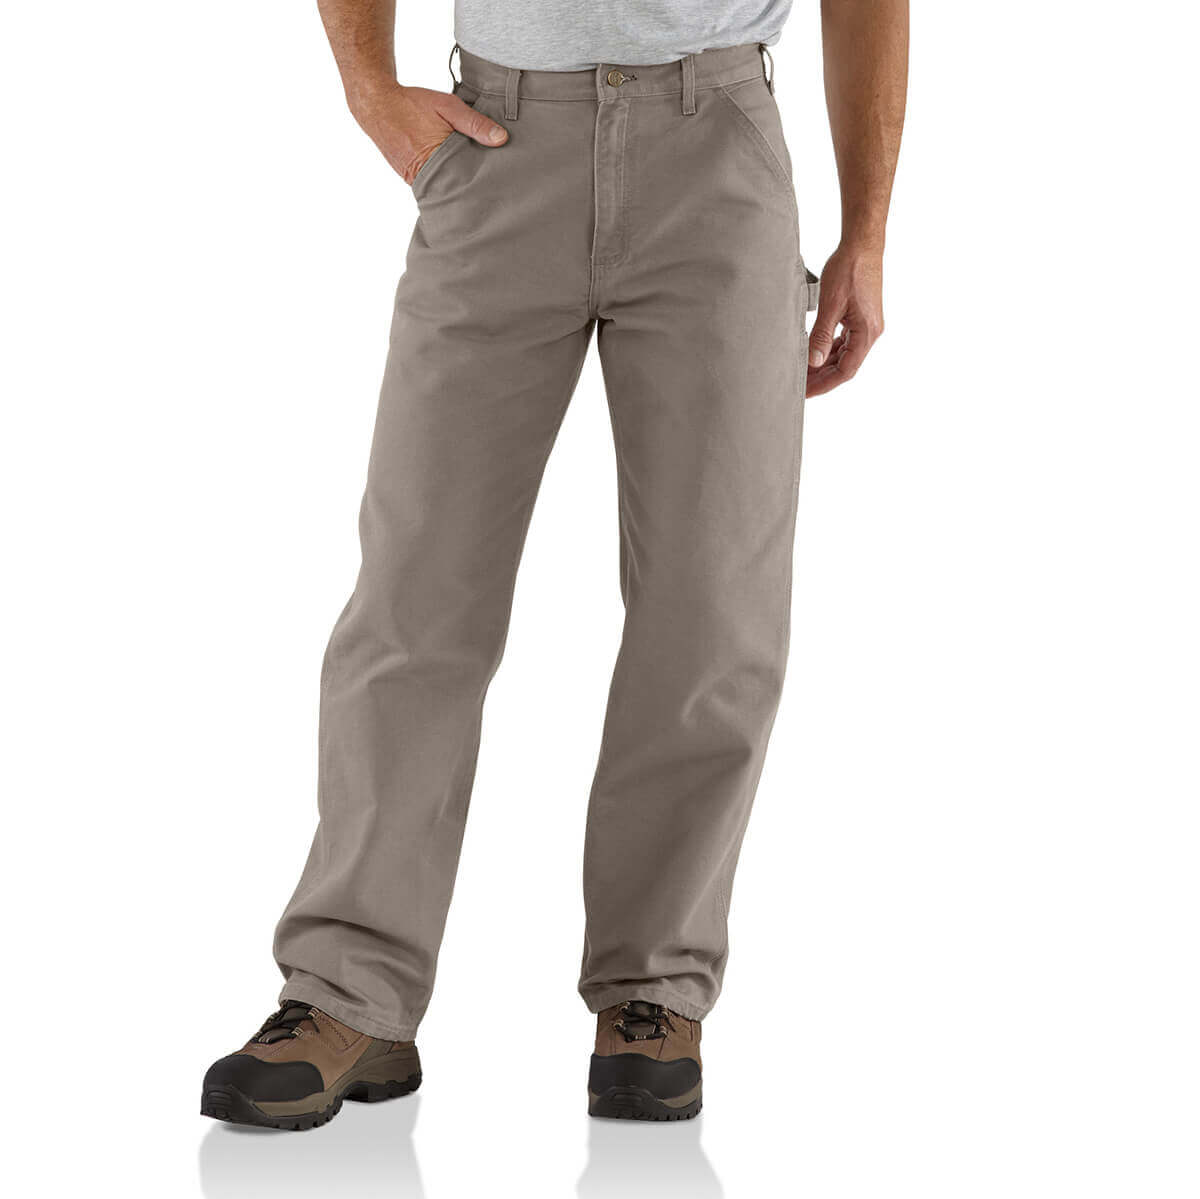 CARHARTT 102291 - Rugged Flex Relaxed Fit Canvas Work Pant - Navy